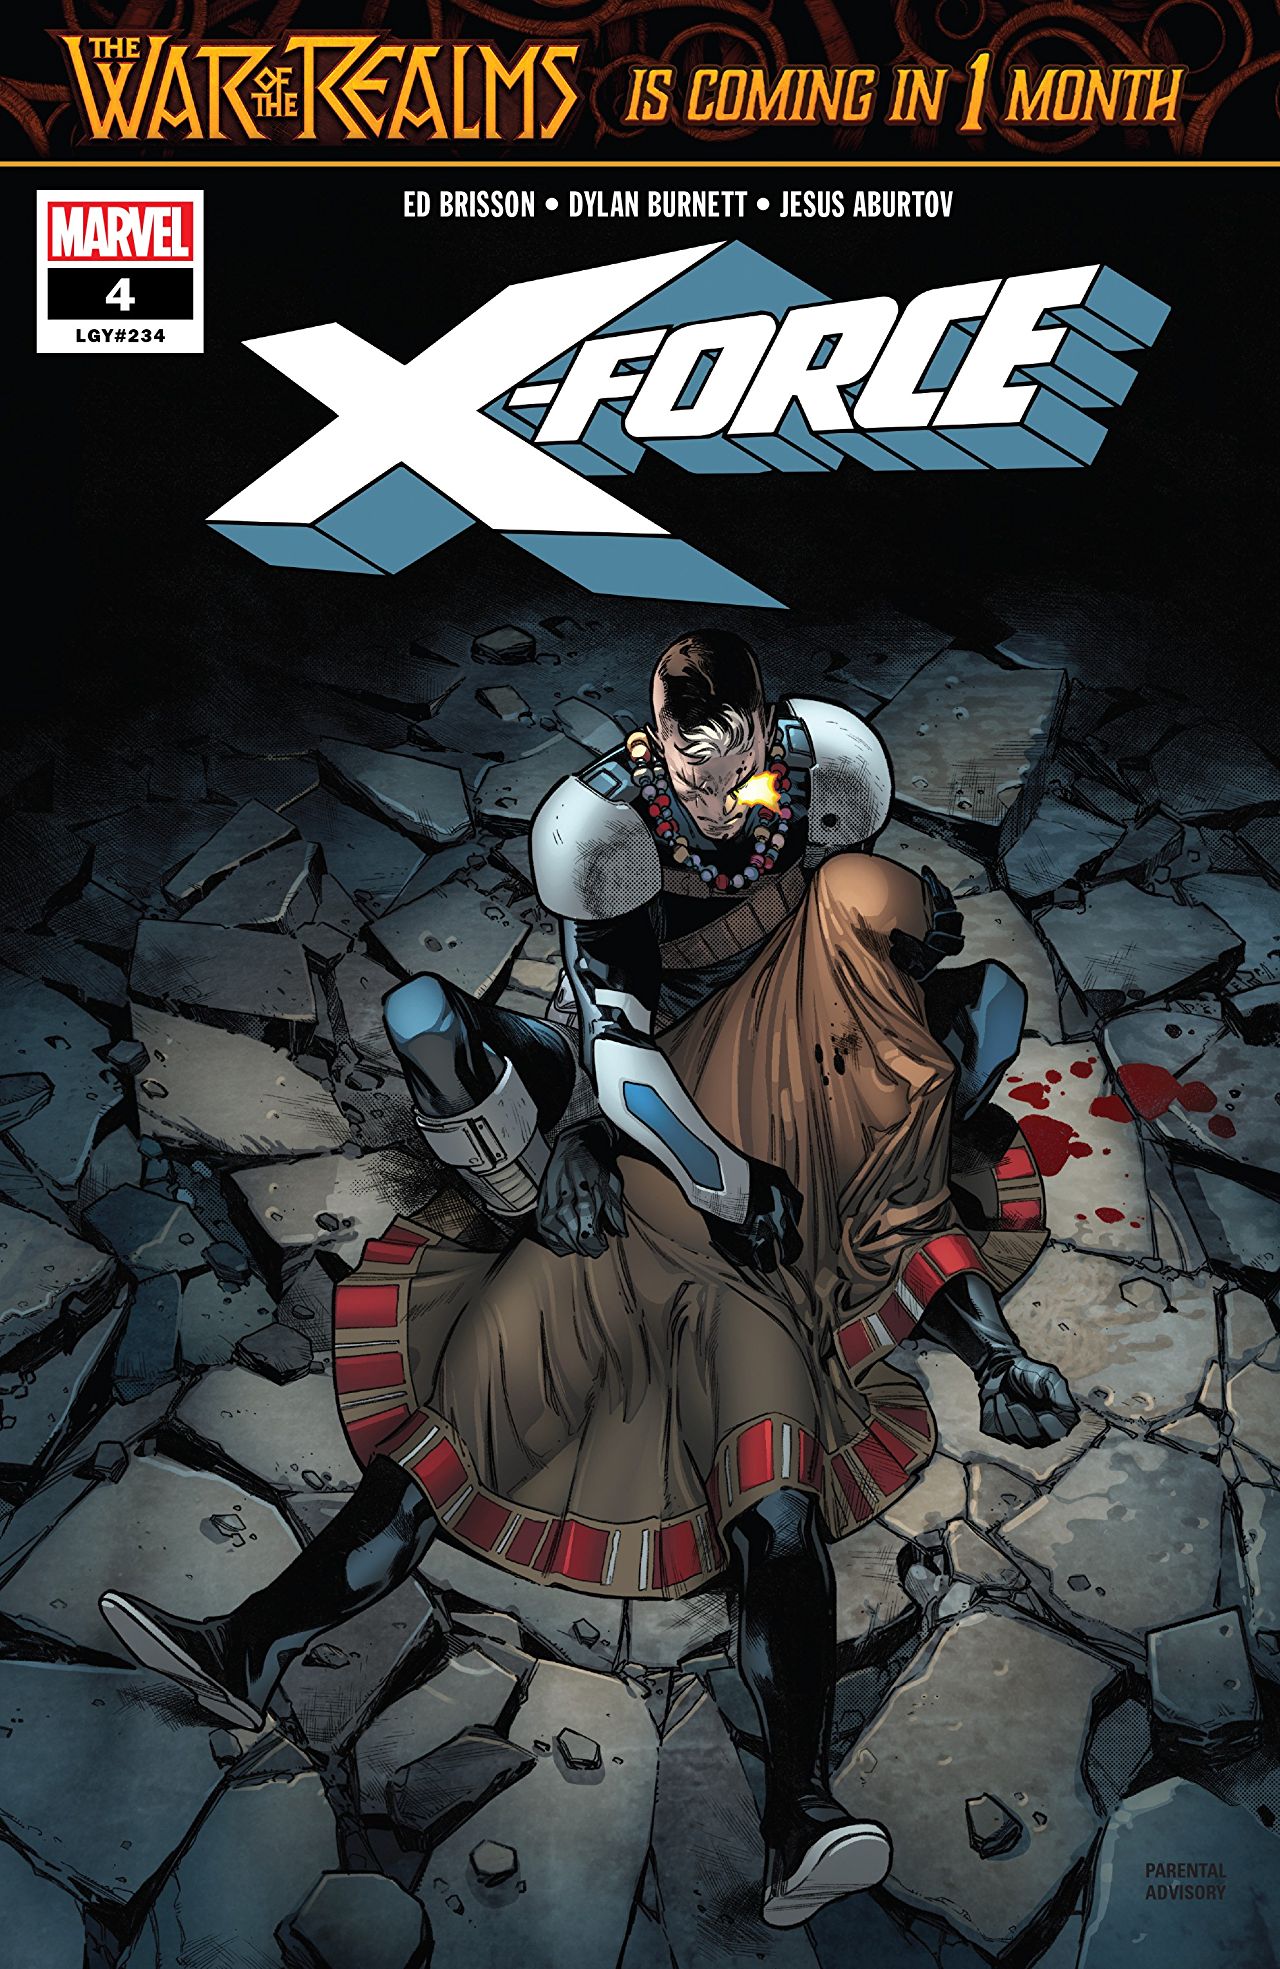 Marvel Preview: X-Force #4